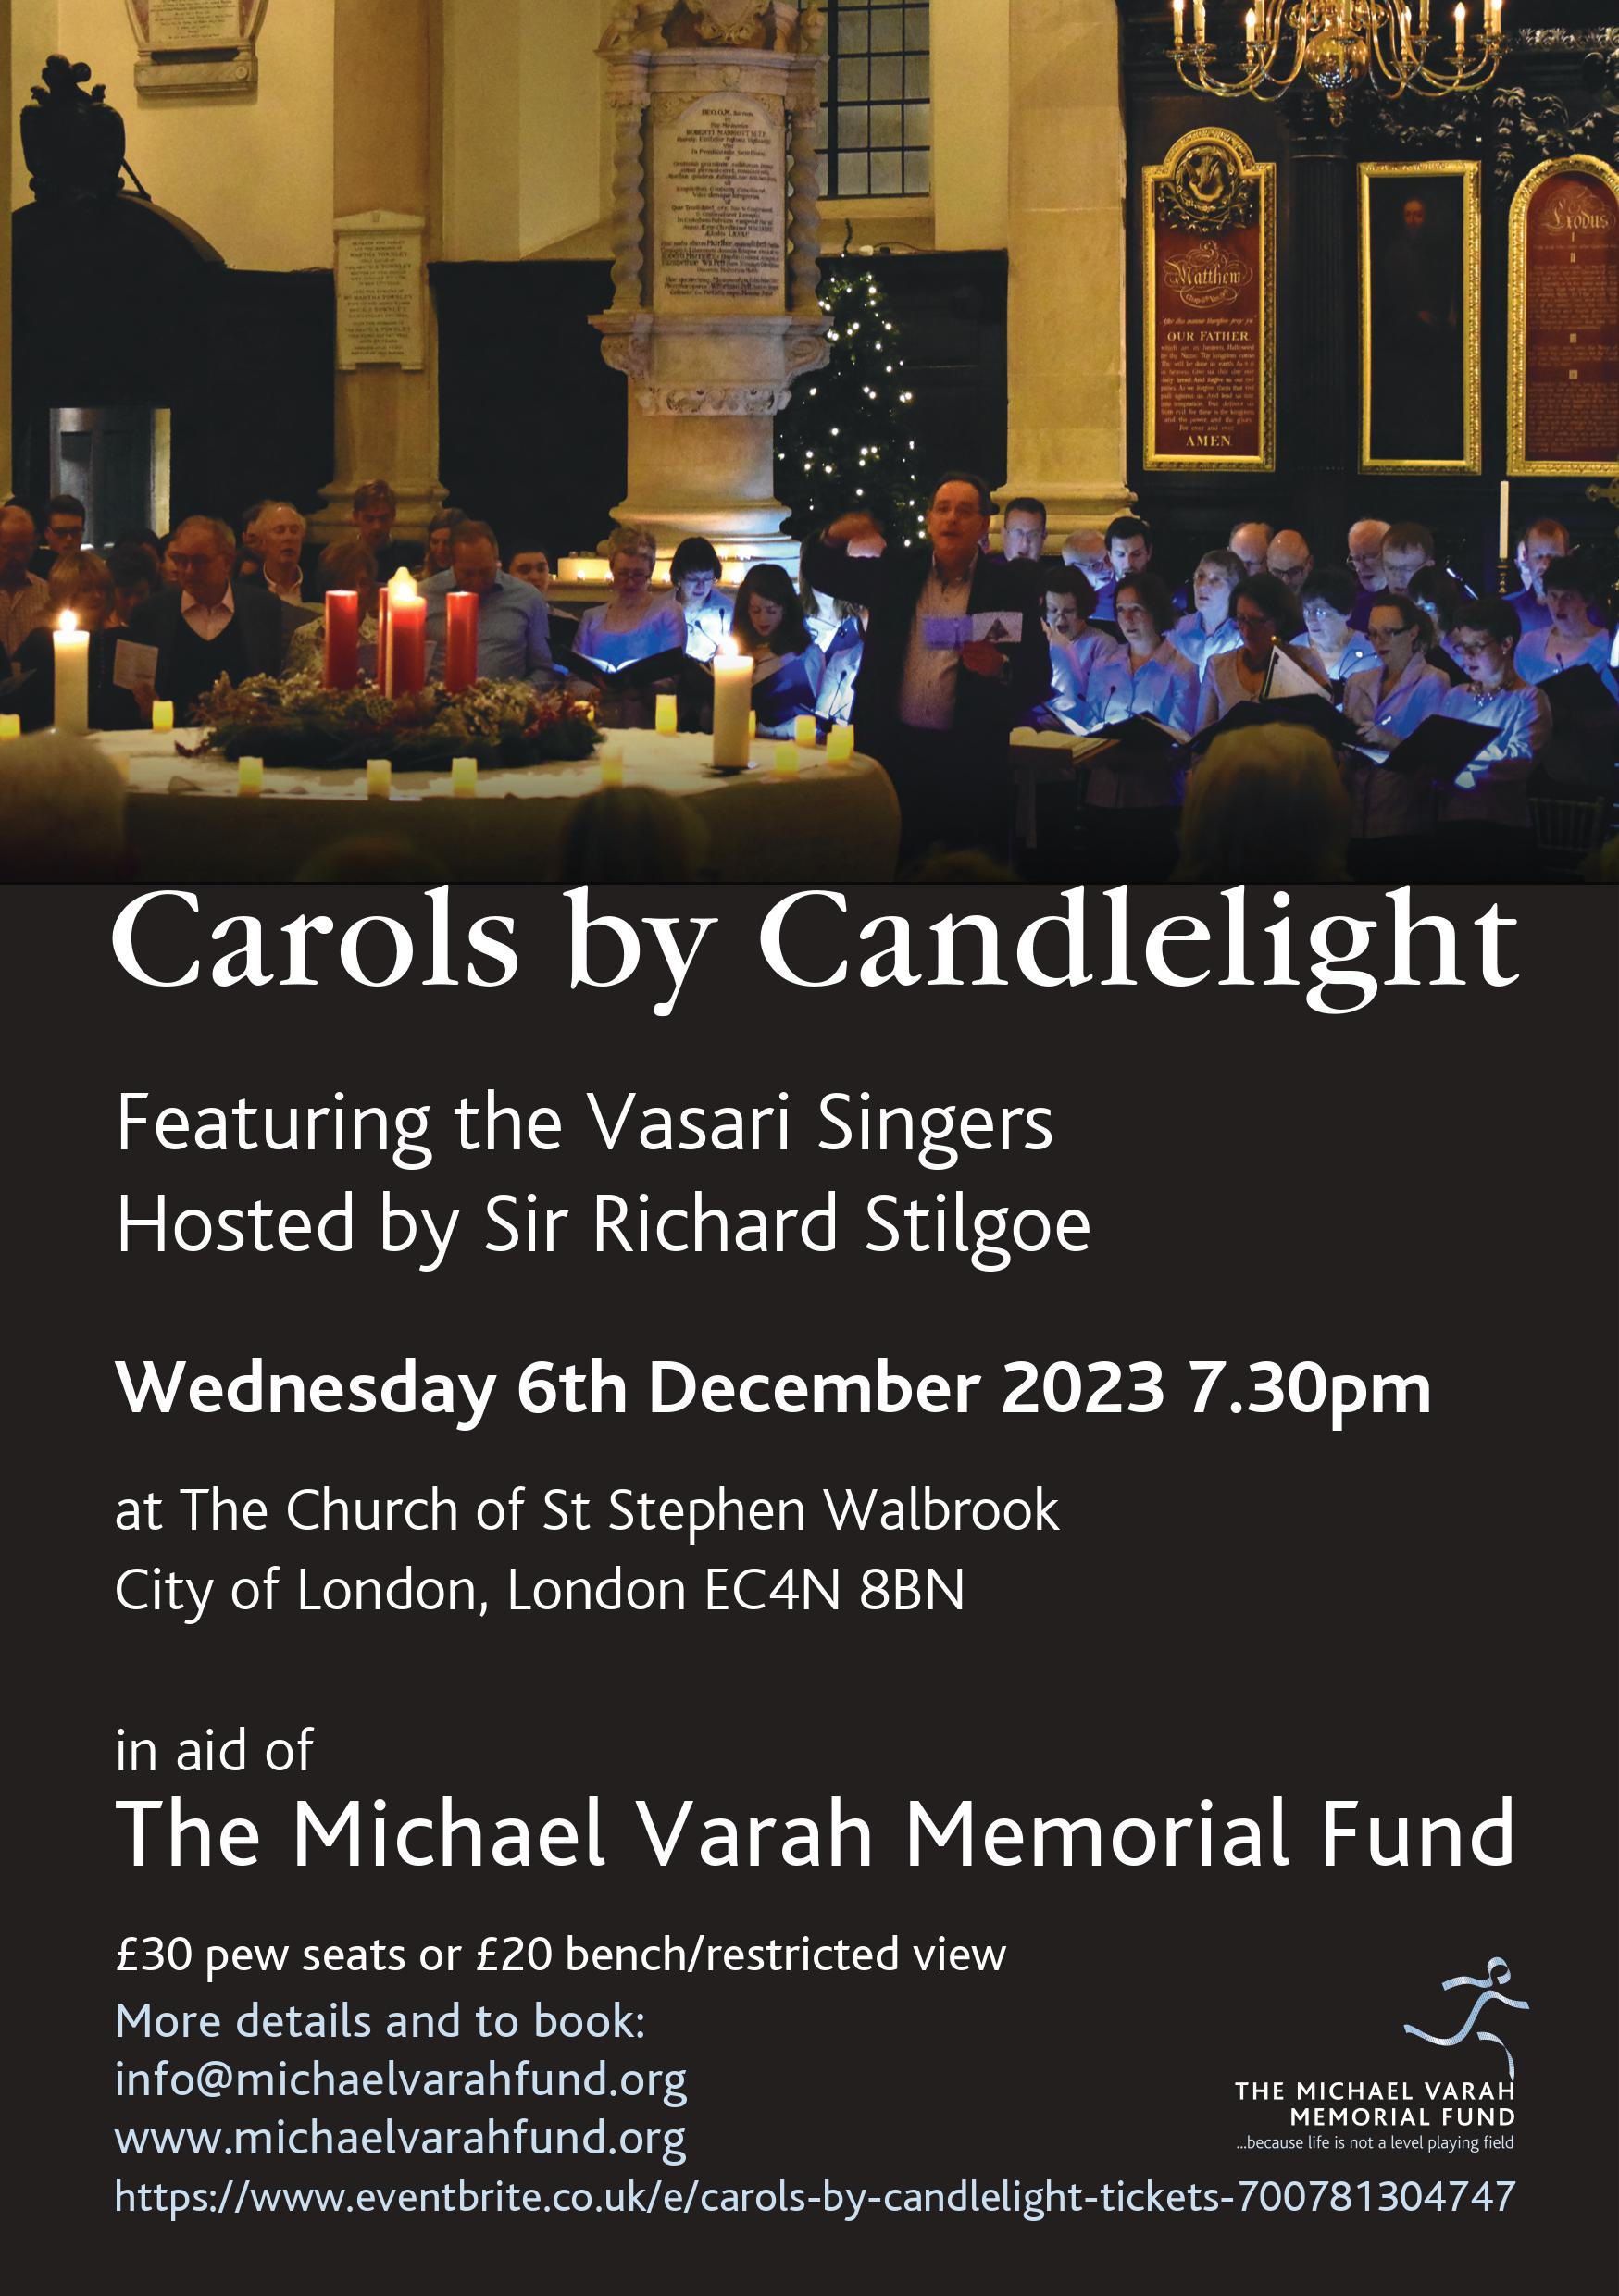 Carols by Candlelight – in aid of the Michael Varah Memorial Fund